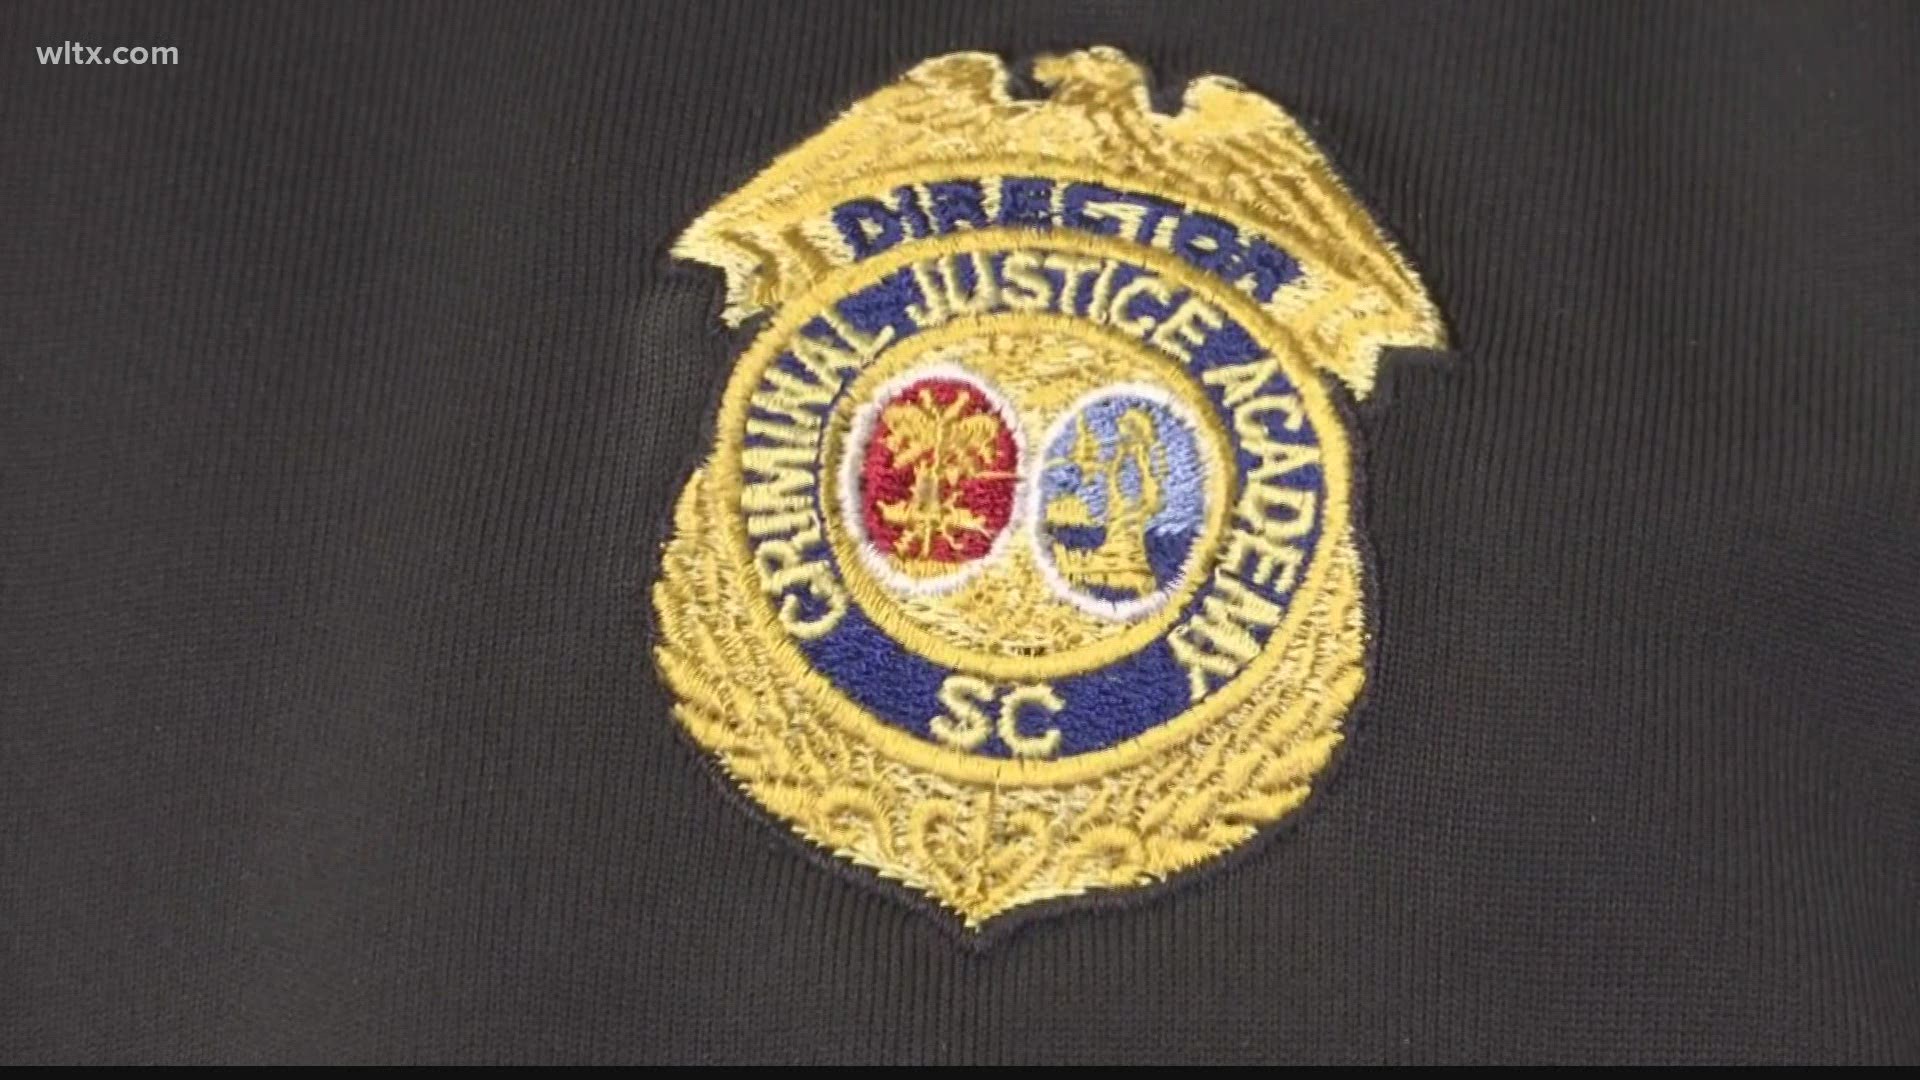 A trip to South Carolina's Criminal Justice Academy is where all police recruits train.